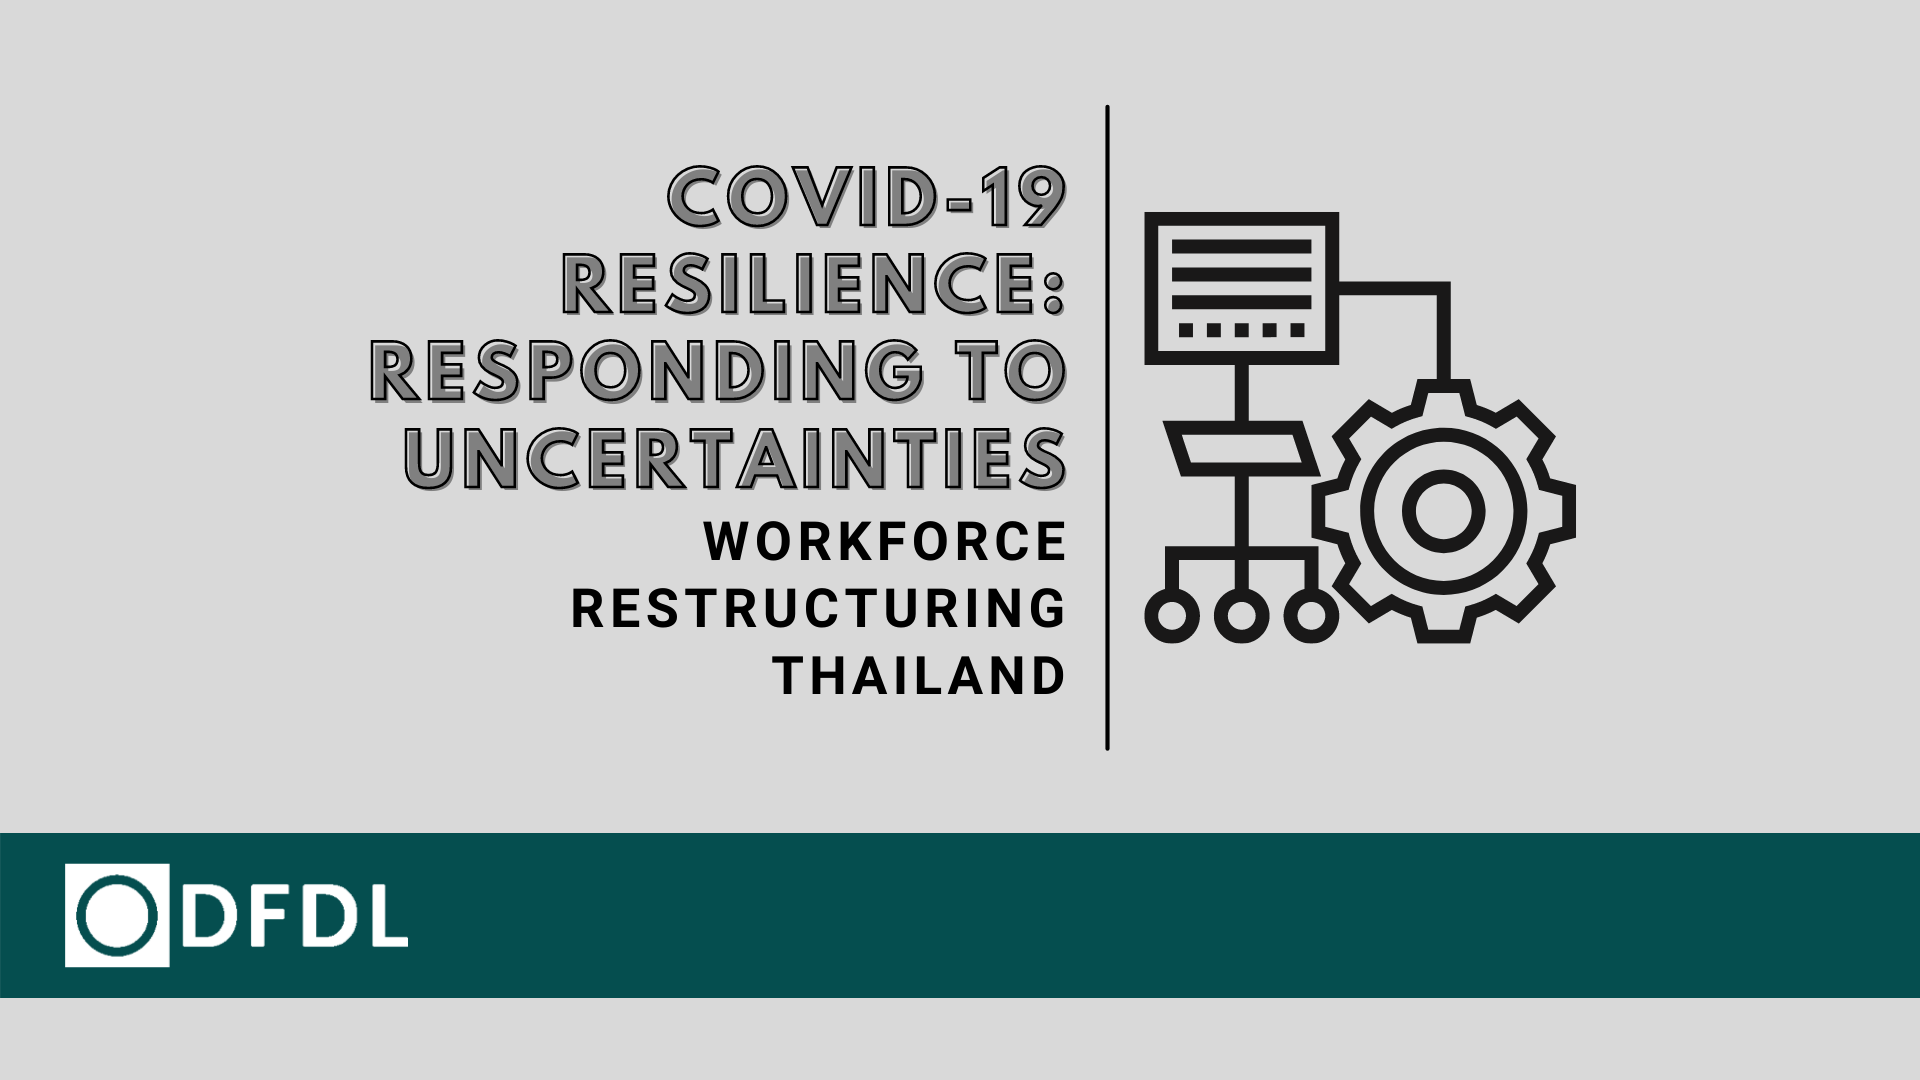 Workforce Restructuring – COVID19 Resilience: Responding to Uncertainties in Thailand